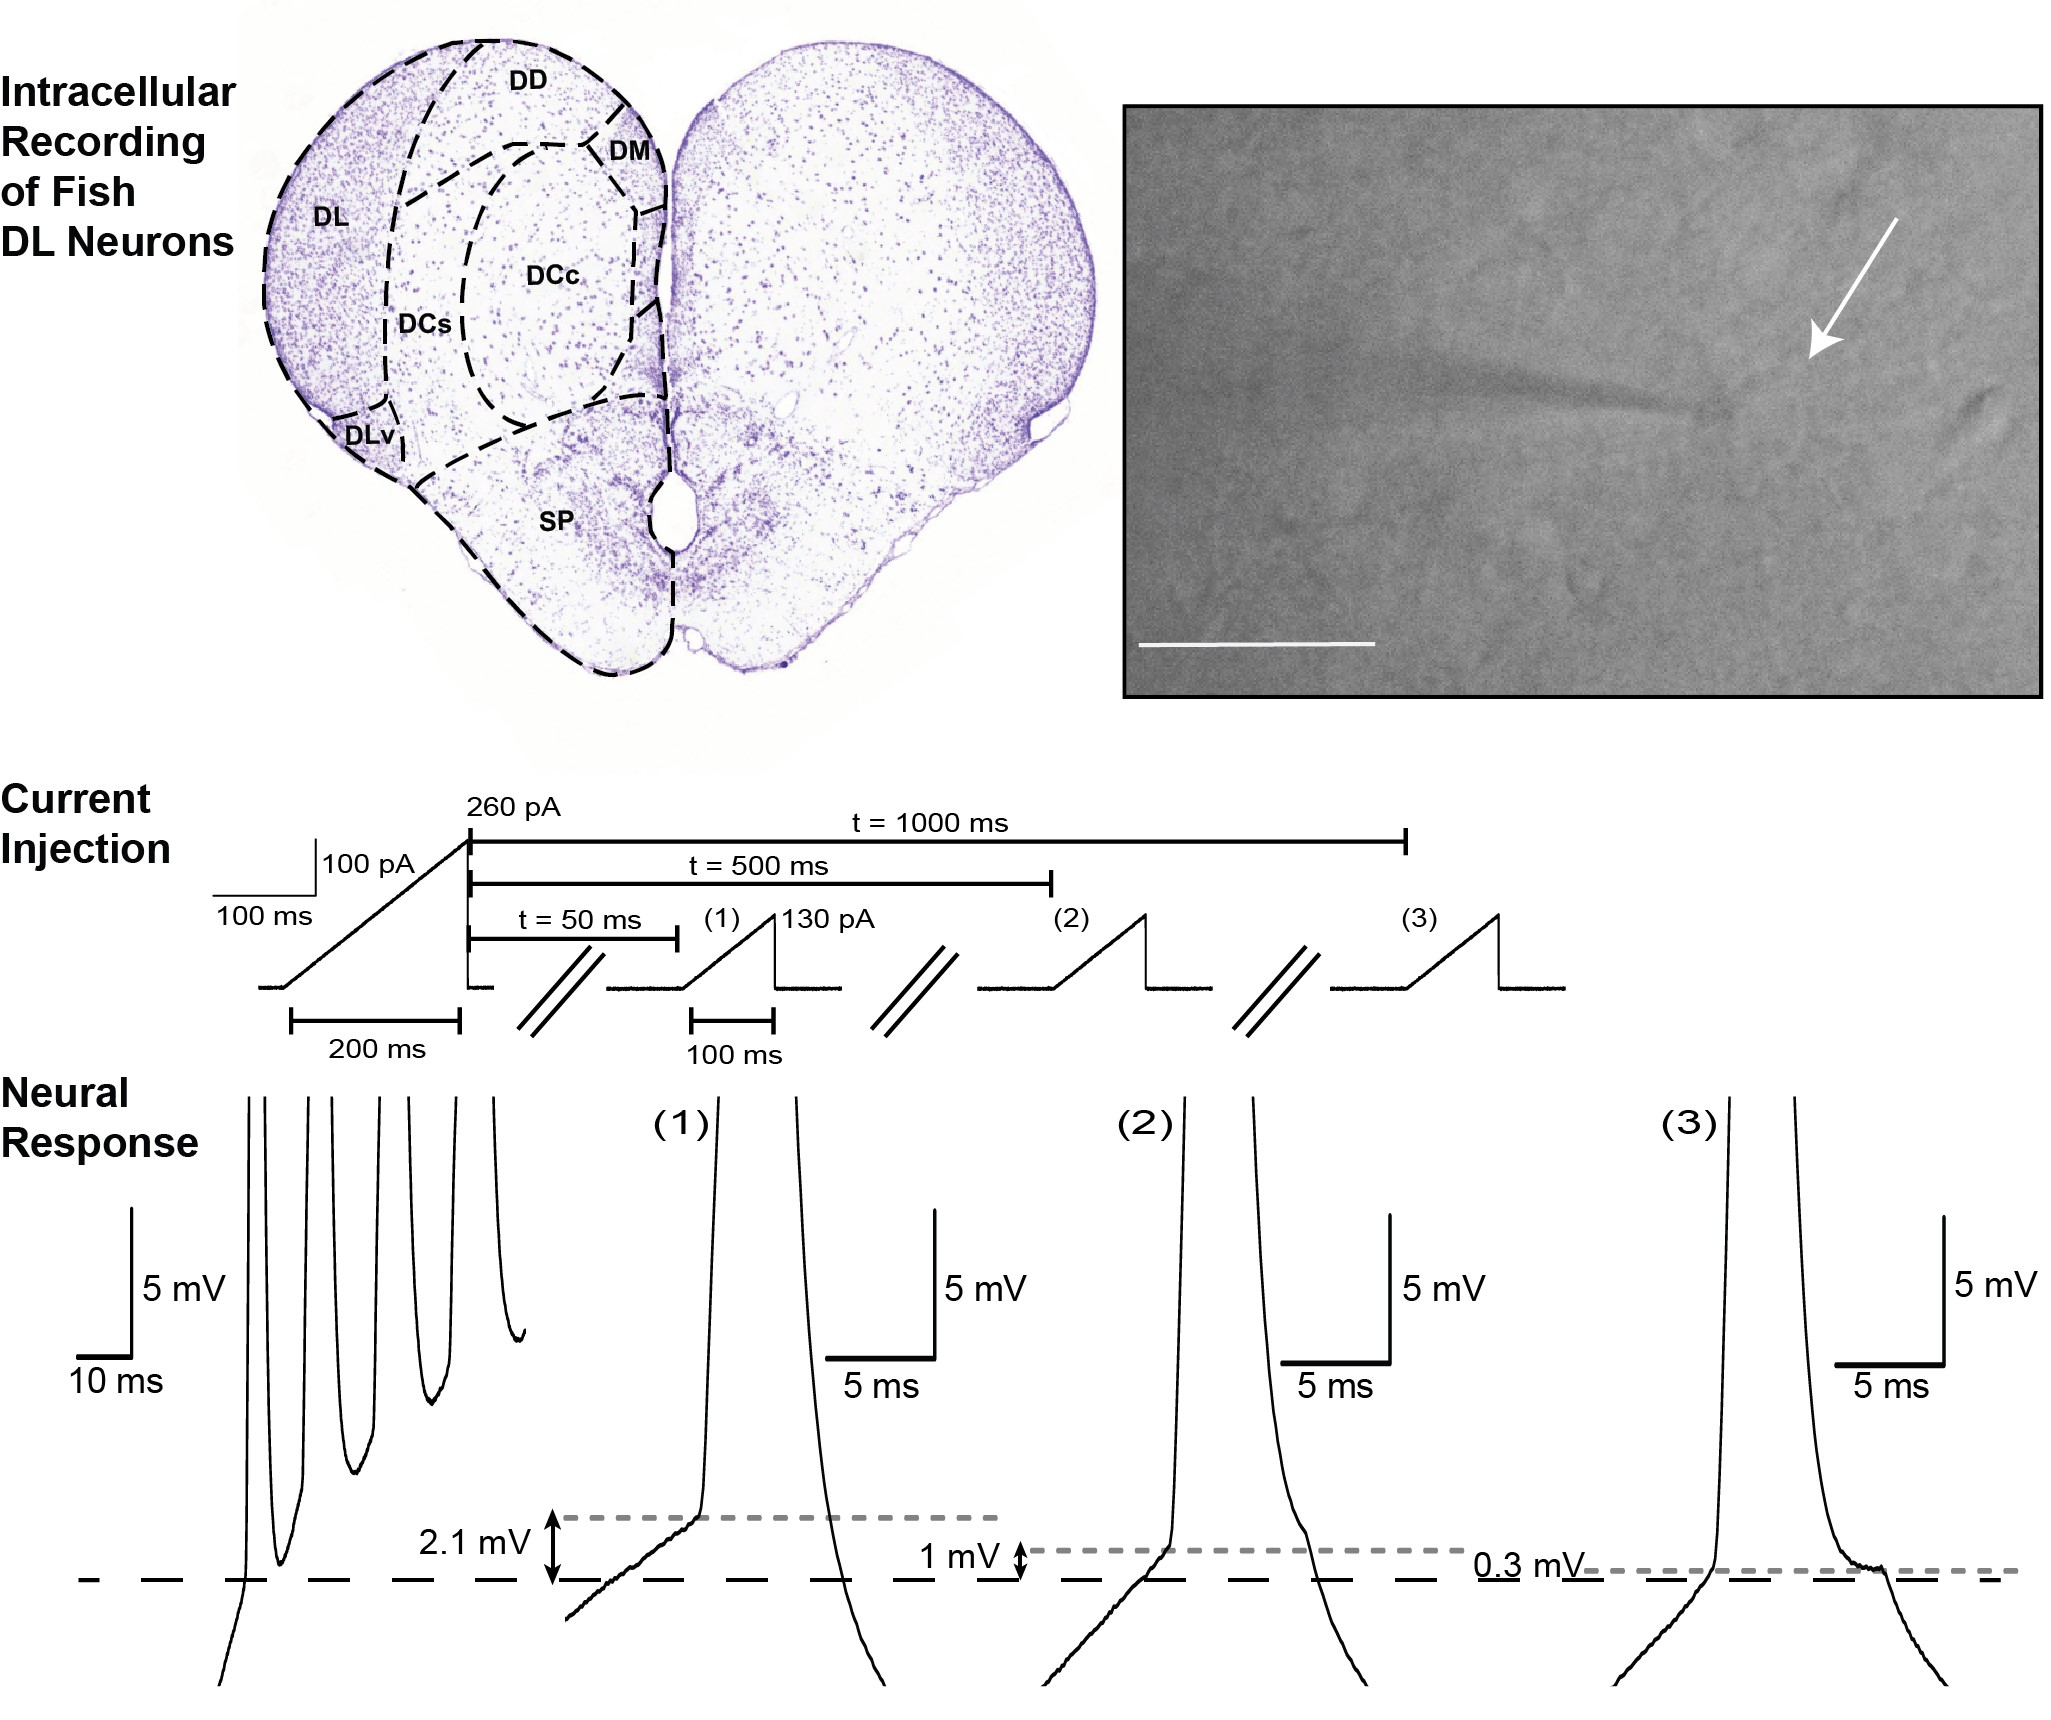 Intracellular recording of DL neurons (adapted from Figs. 1 and 9 from Trinh et al., 2019, eNeuro).